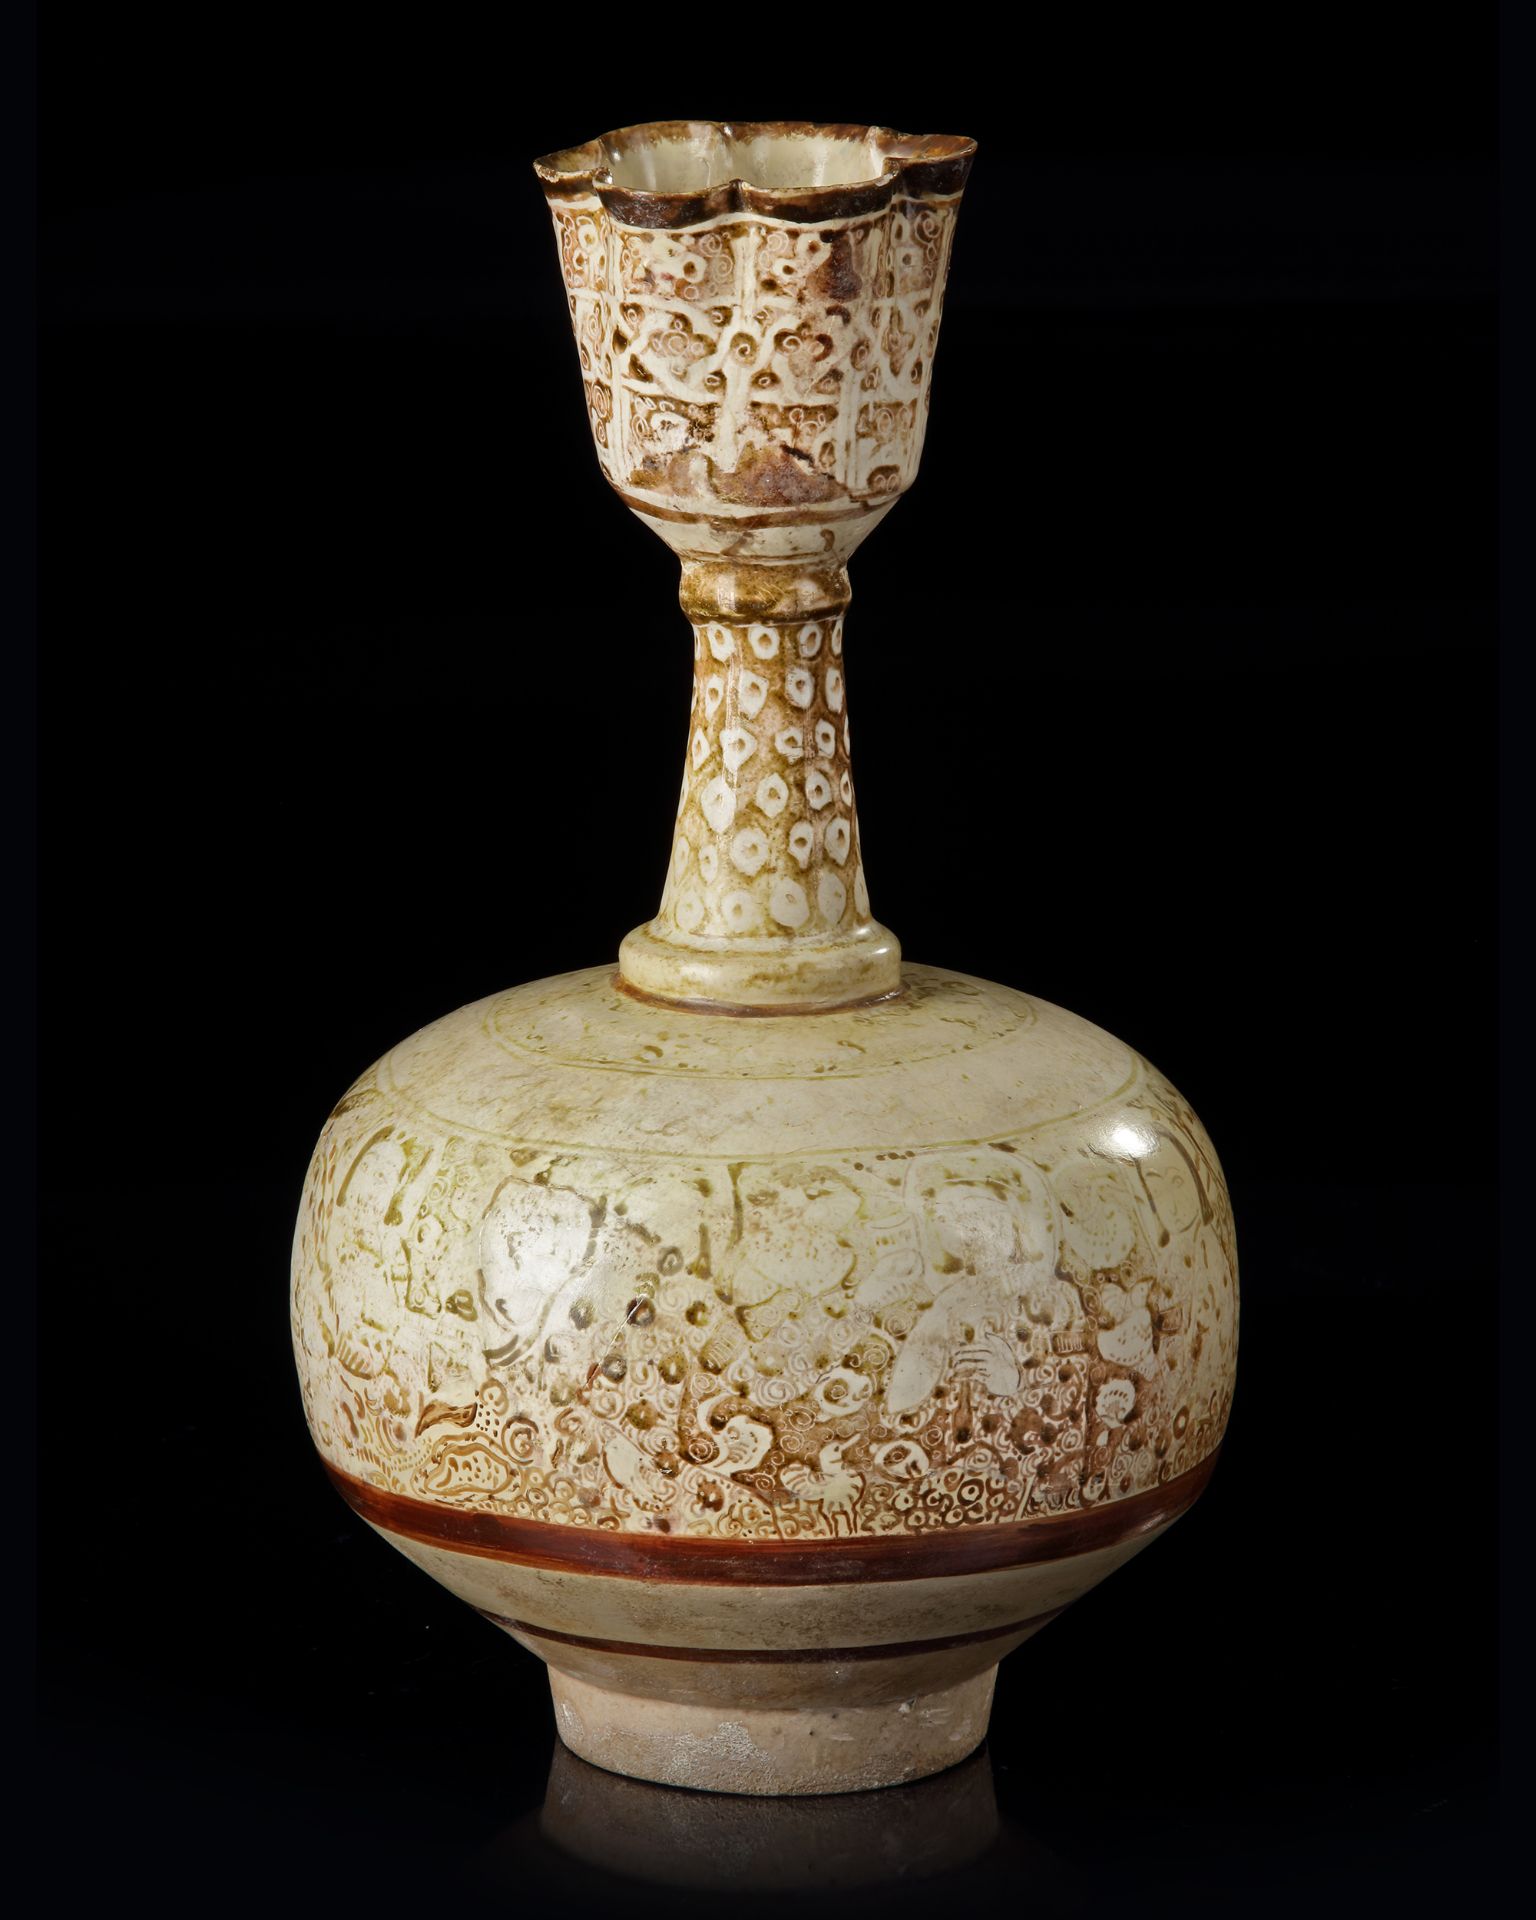 A KASHAN LUSTRE POTTERY BOTTLE VASE, PERSIA, EARLY 13TH CENTURY - Image 3 of 10